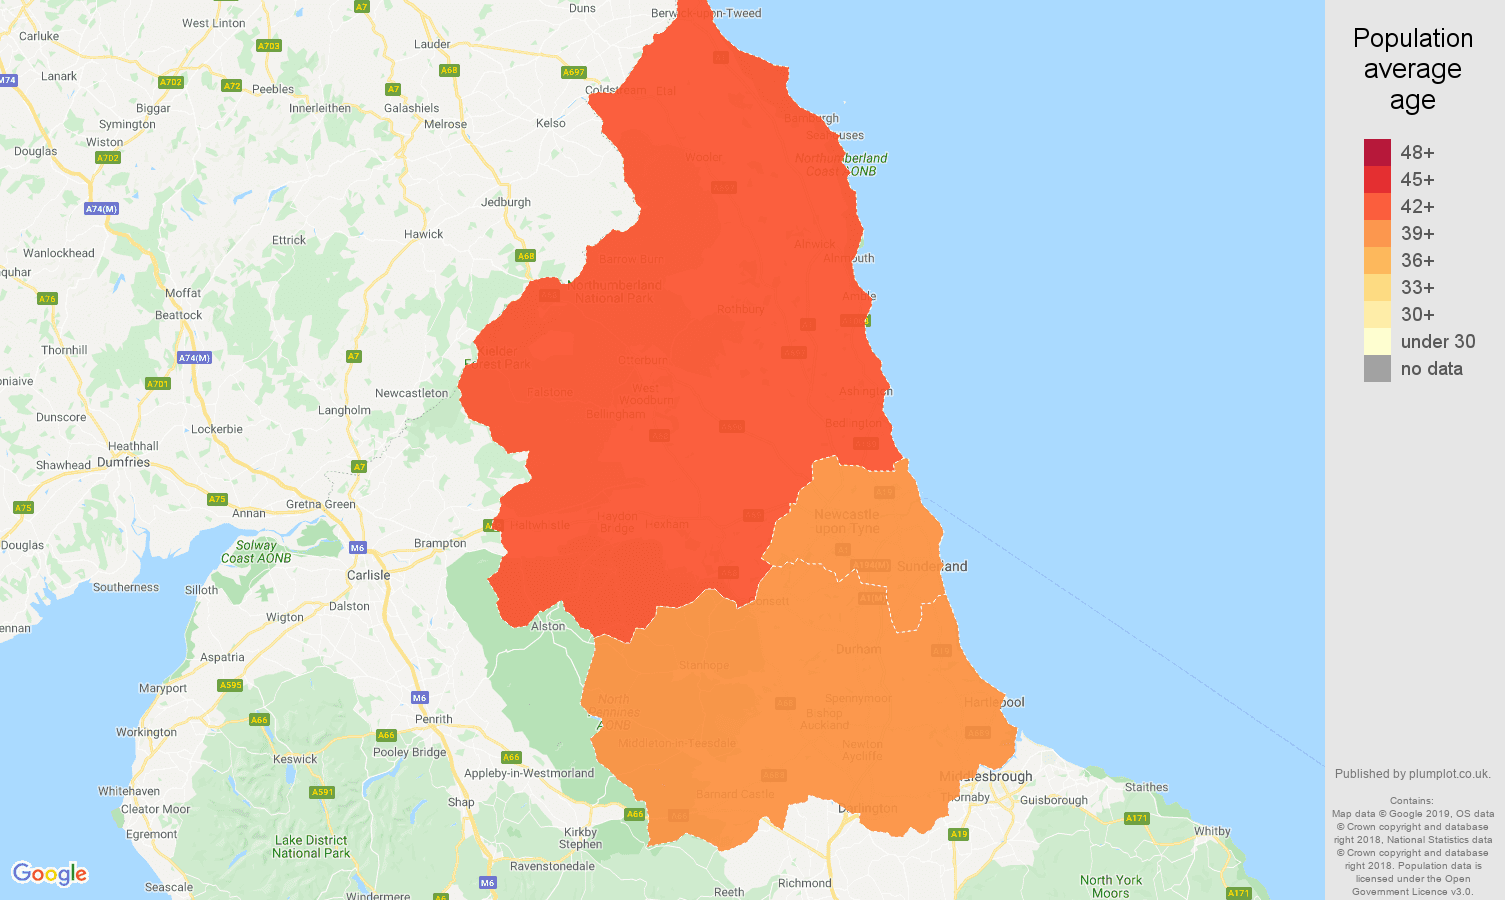 North East population average age map